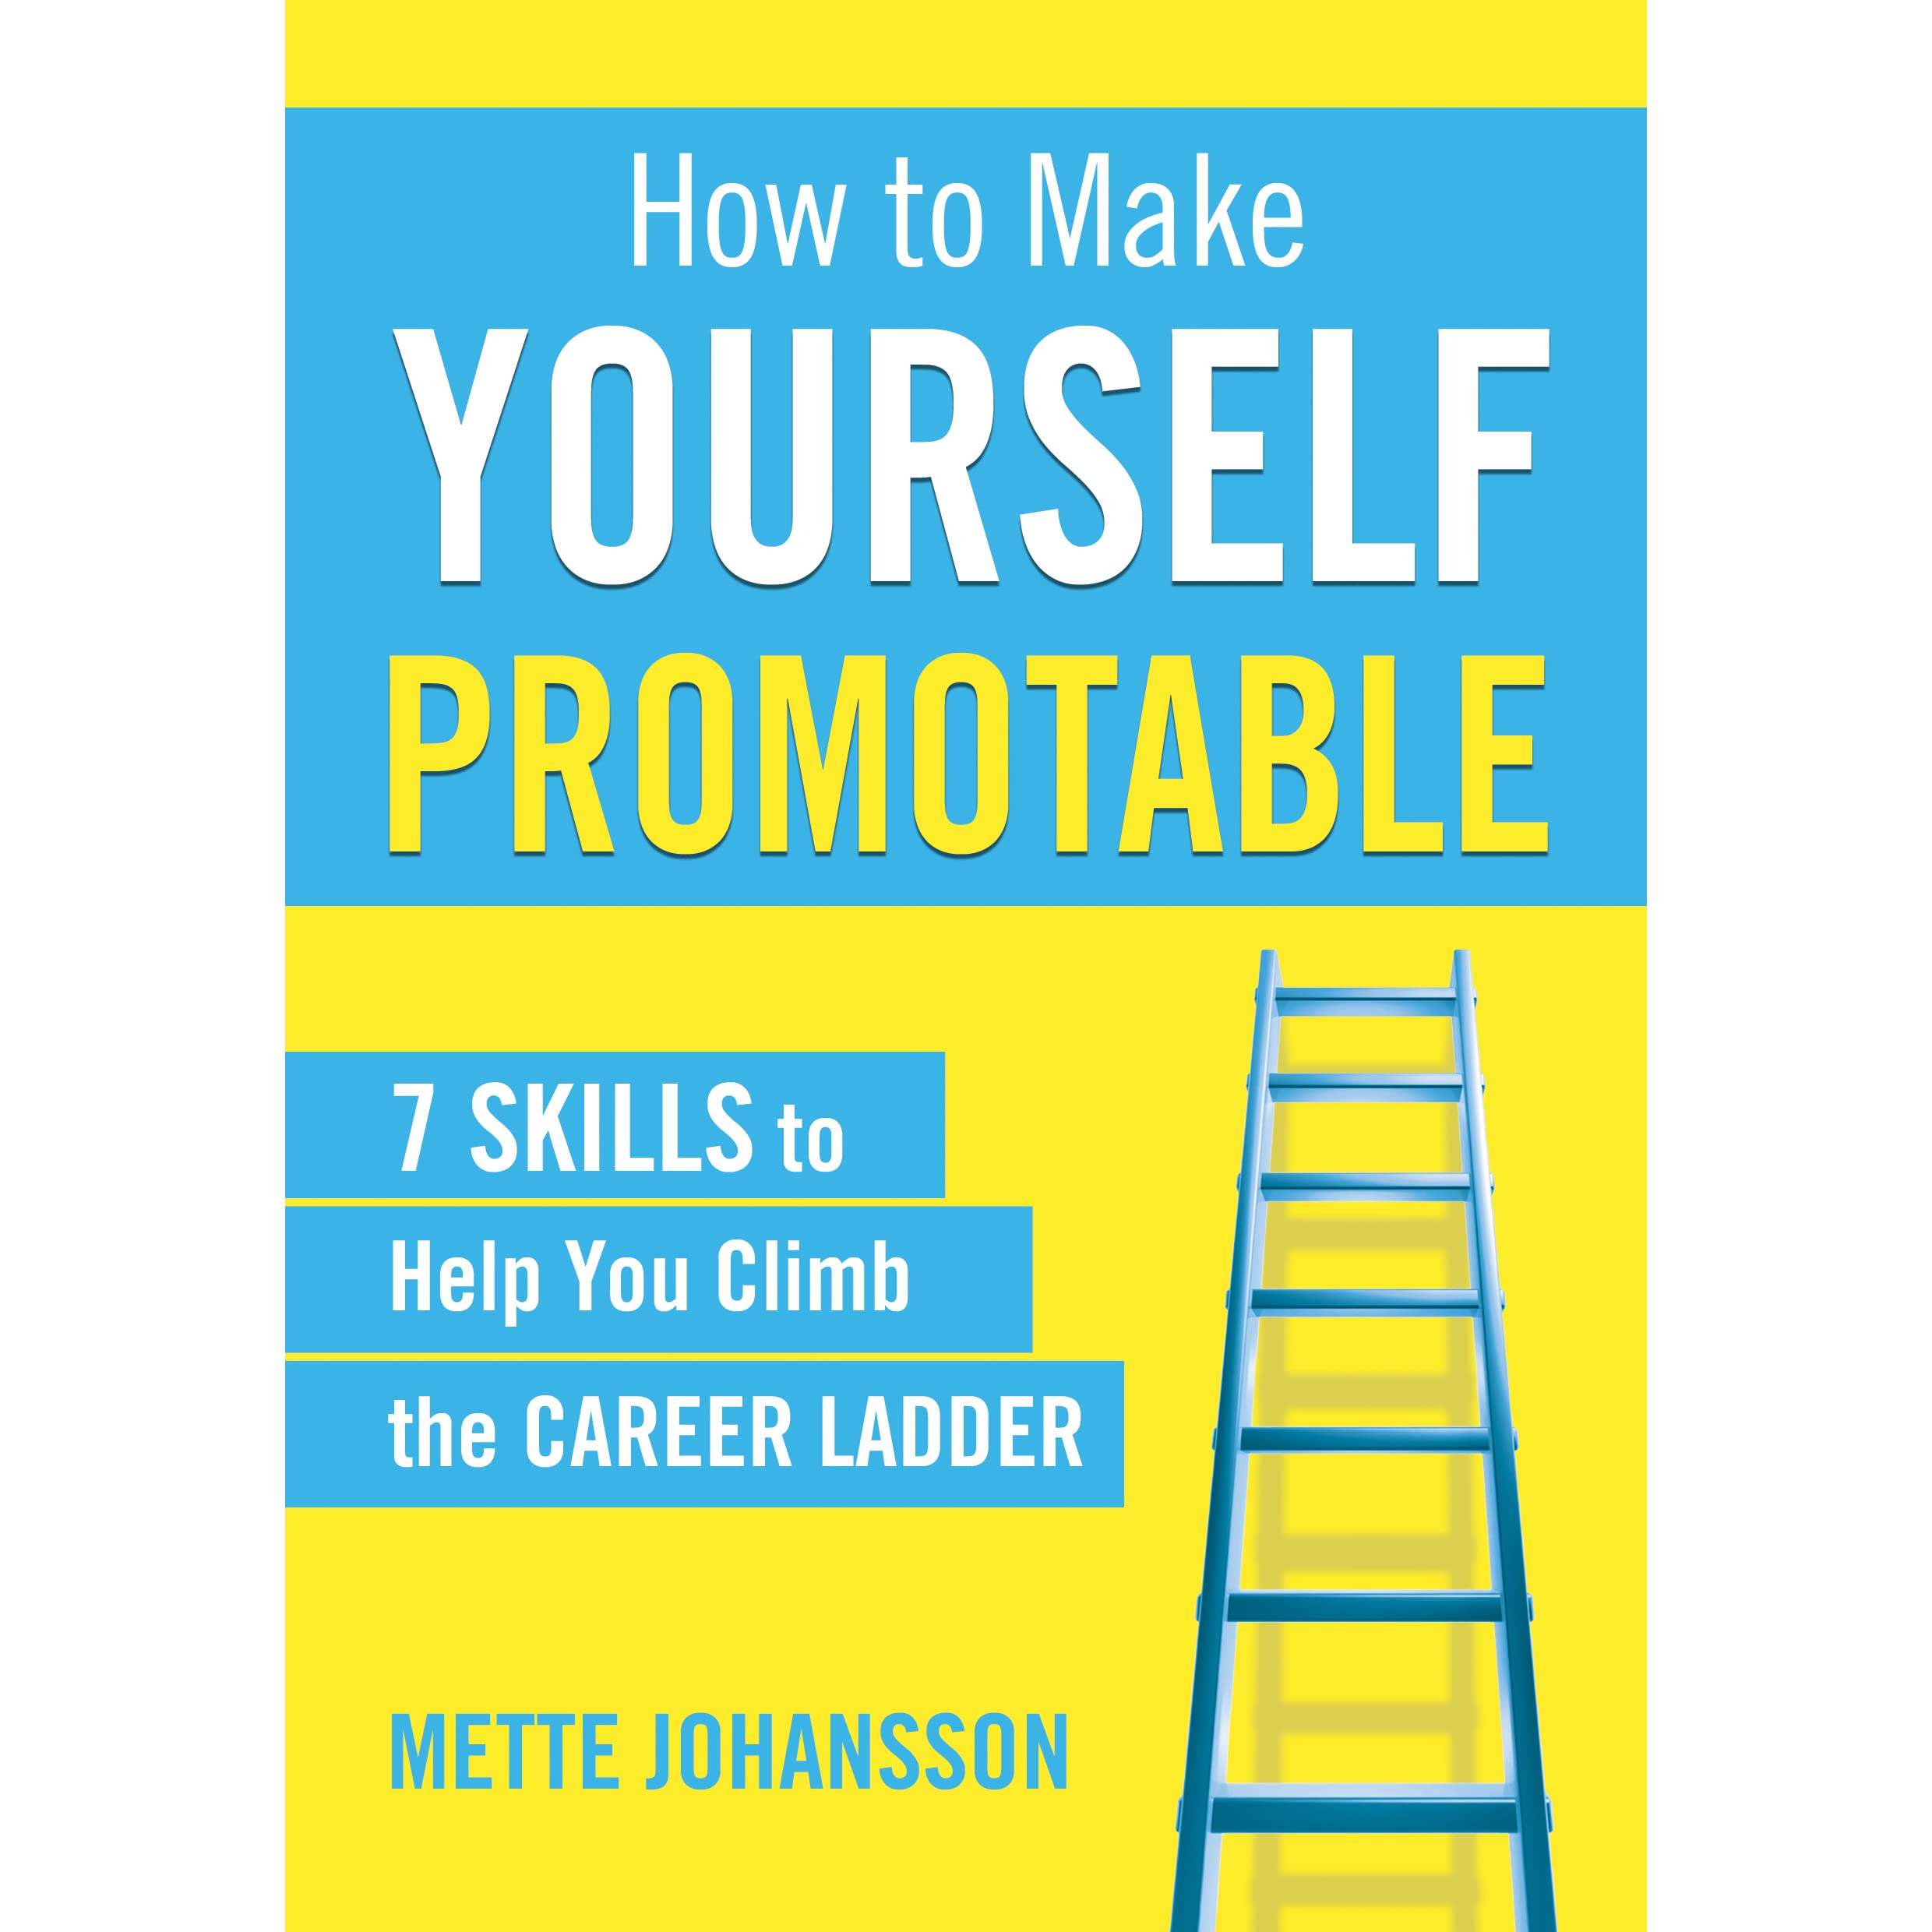 How to Make Yourself Promotable